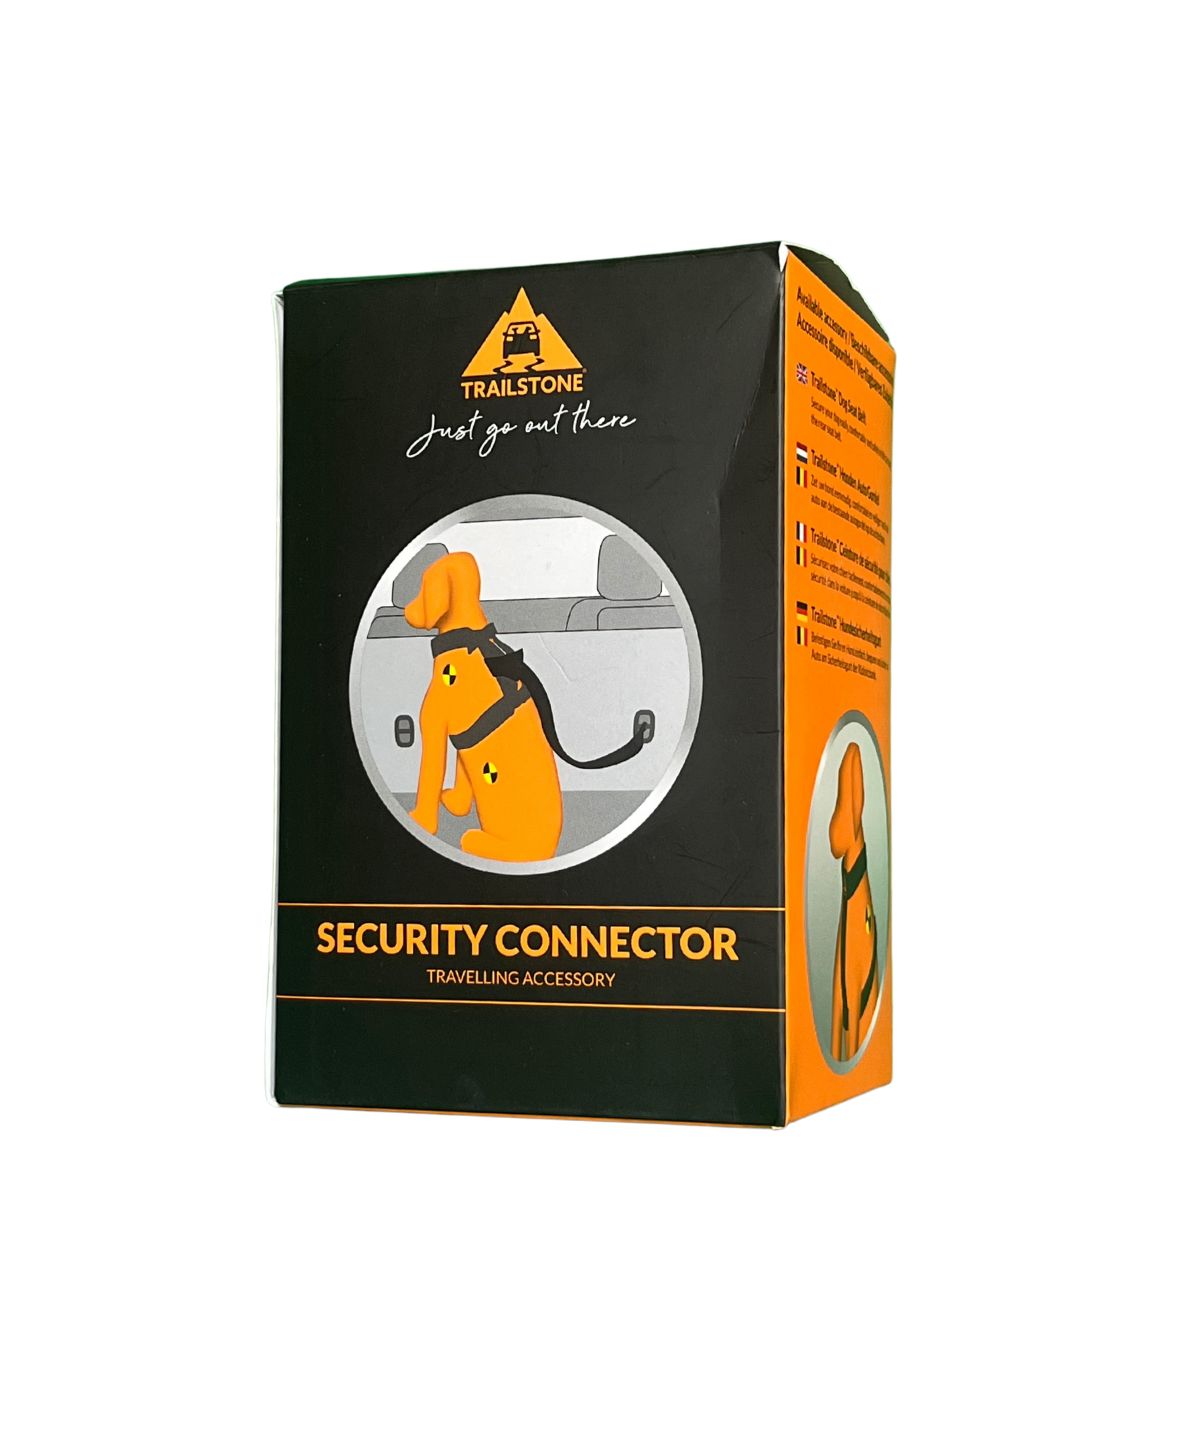 Trailstone security connector